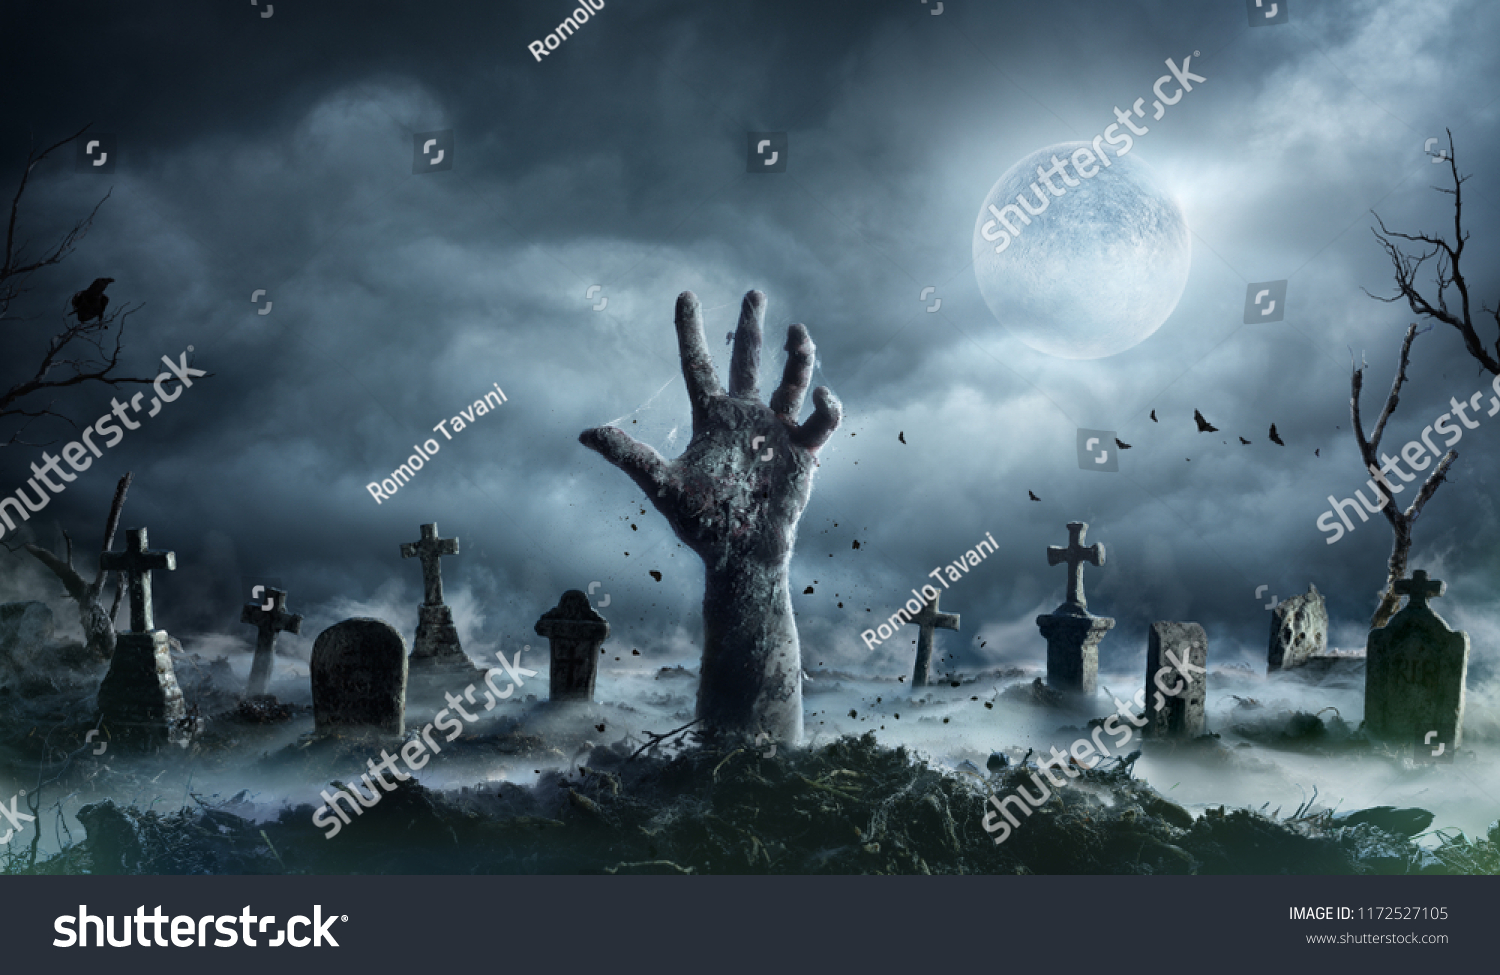 Zombie Hand Rising Out Of A Graveyard In Spooky Night
 #1172527105